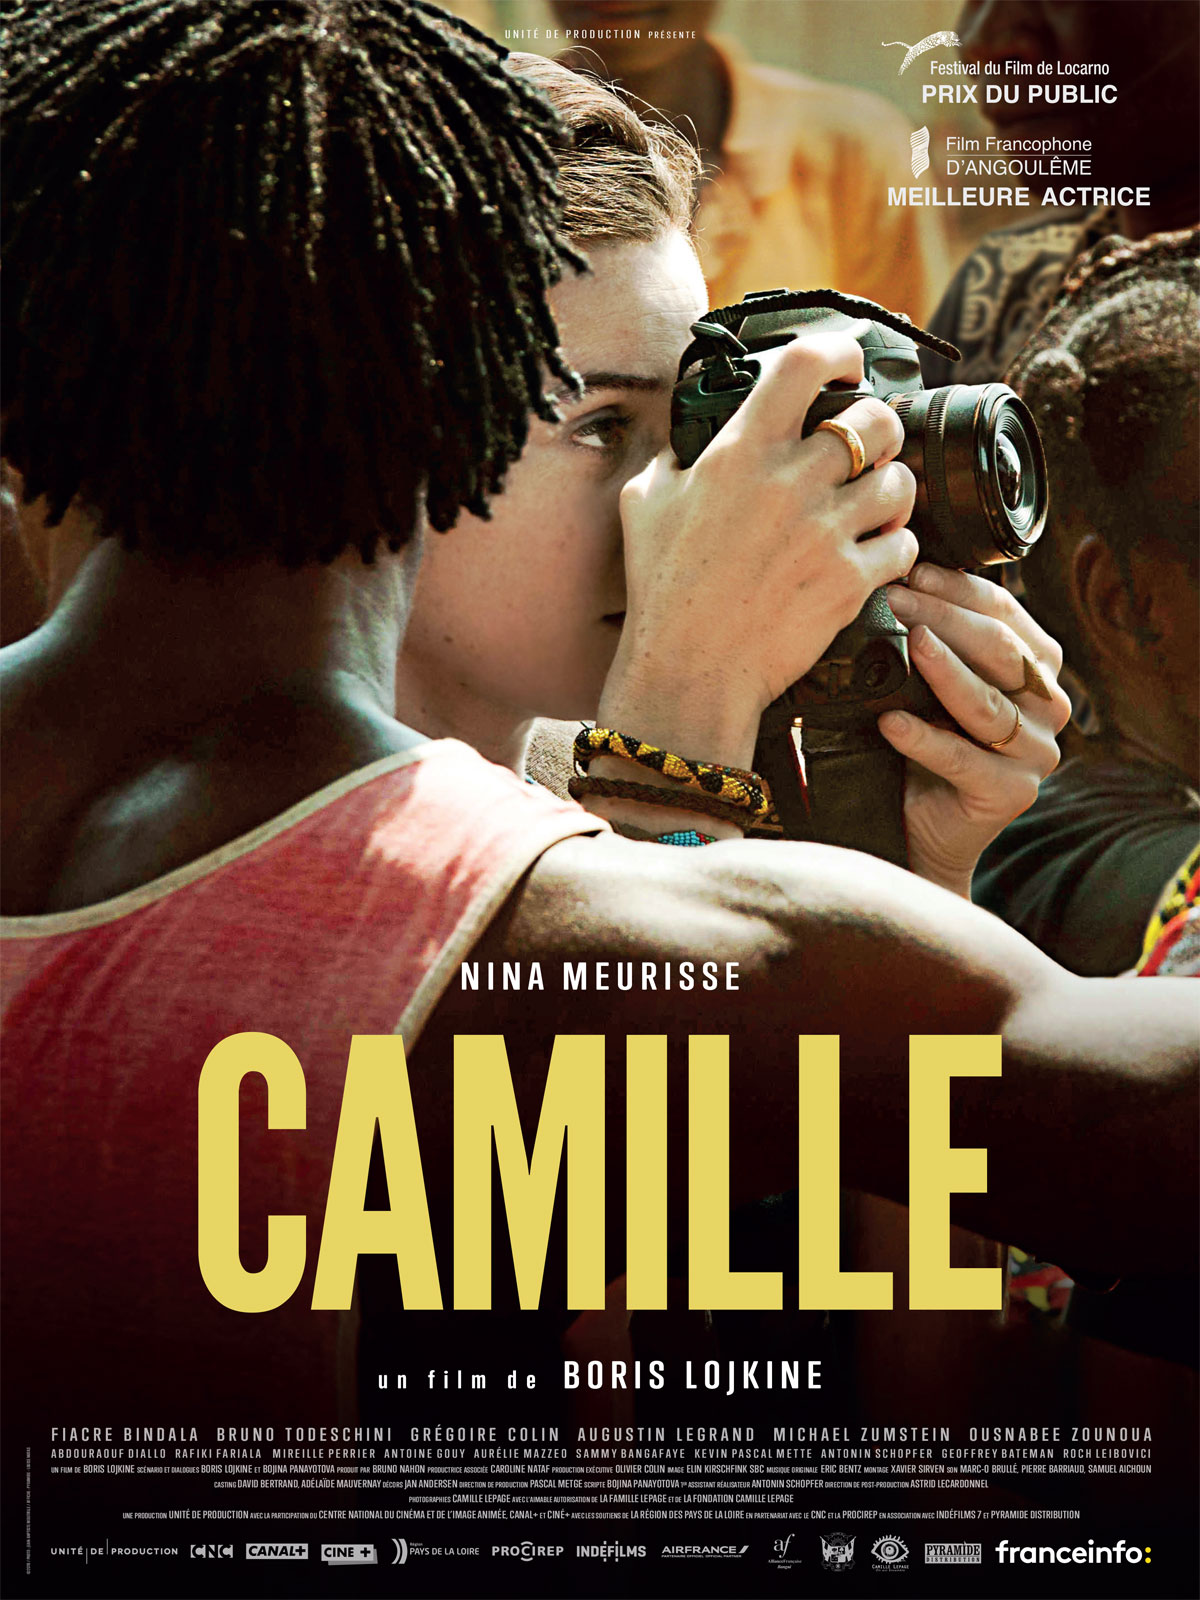 Camille streaming vf gratuit